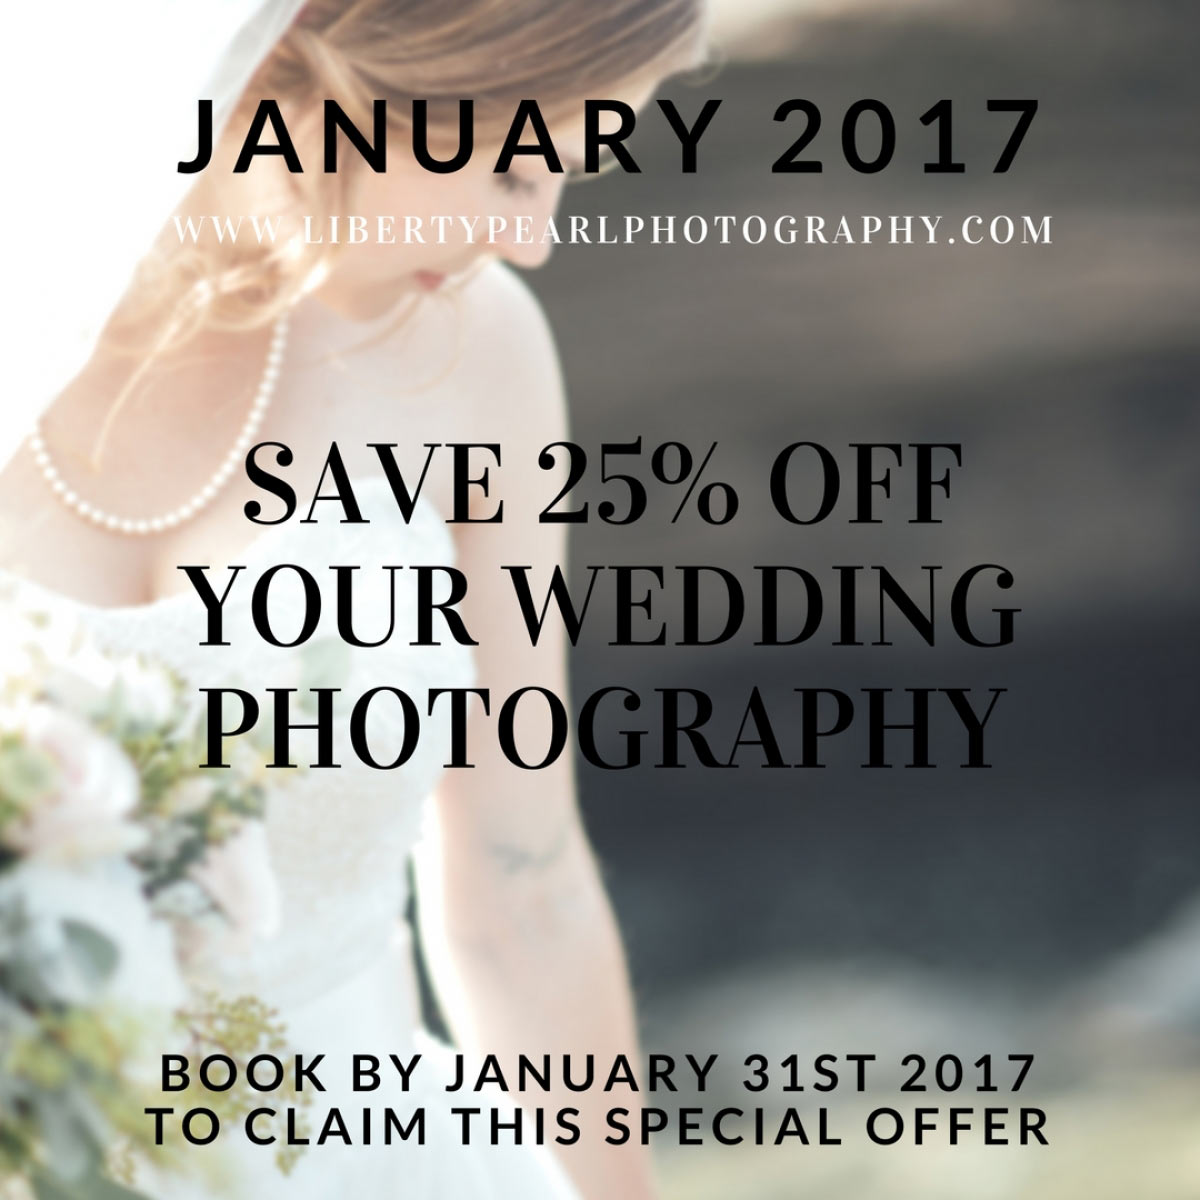 Special offer from Liberty Pearl Photography